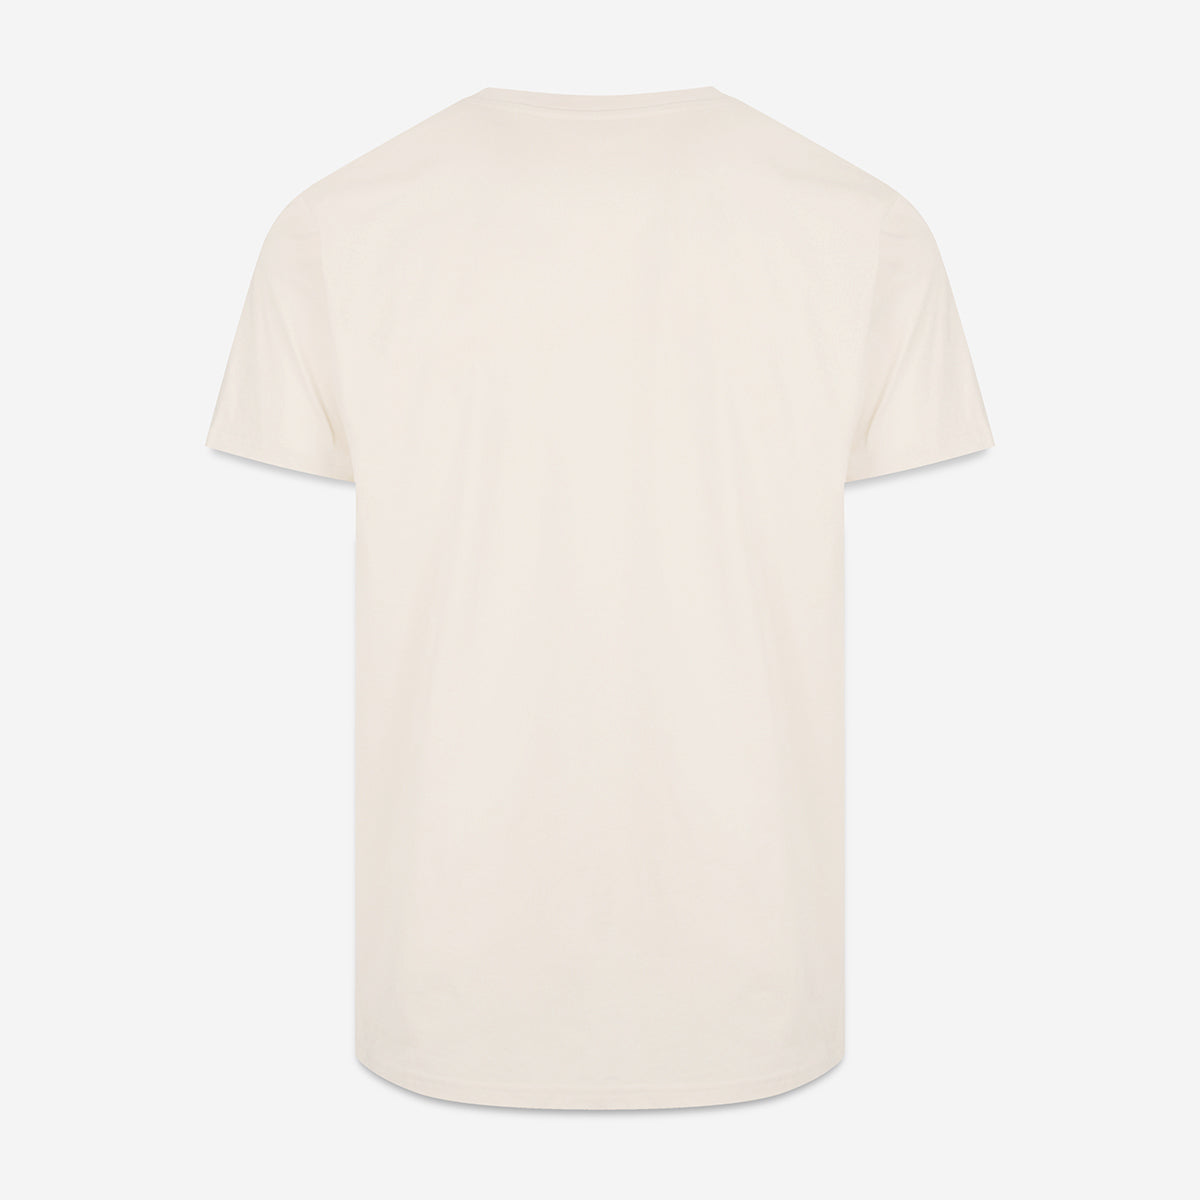 Think It Over Men's Tee - Off White